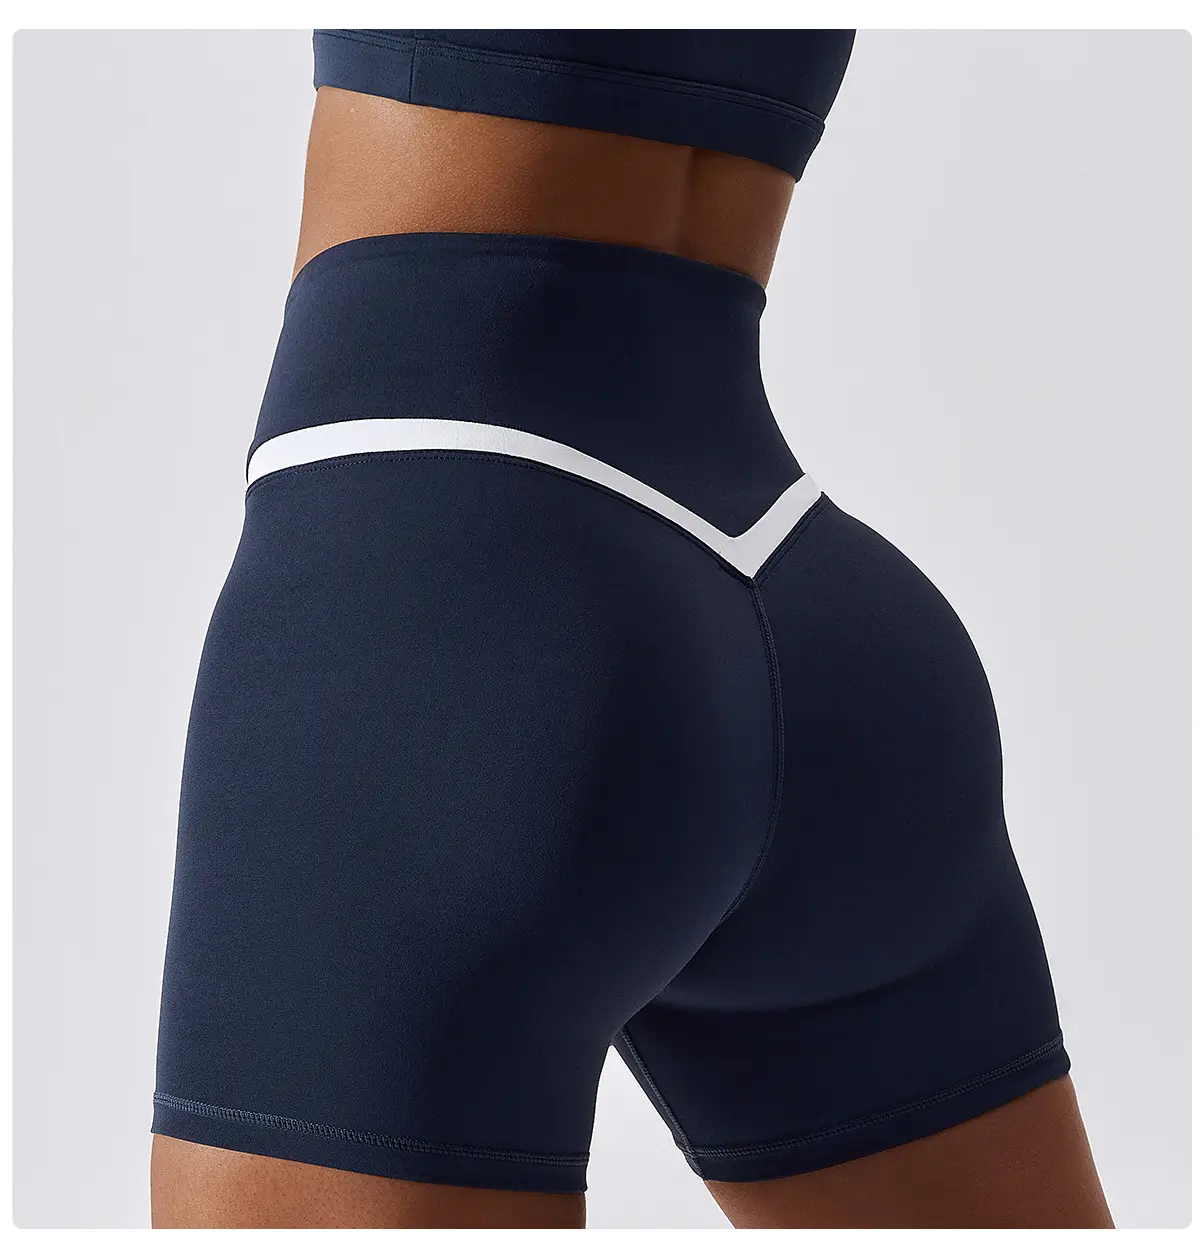 Contrasting color buttock lifting nude sense Yoga shorts women's crossed waist head tight sweatpants running speed dry fitness